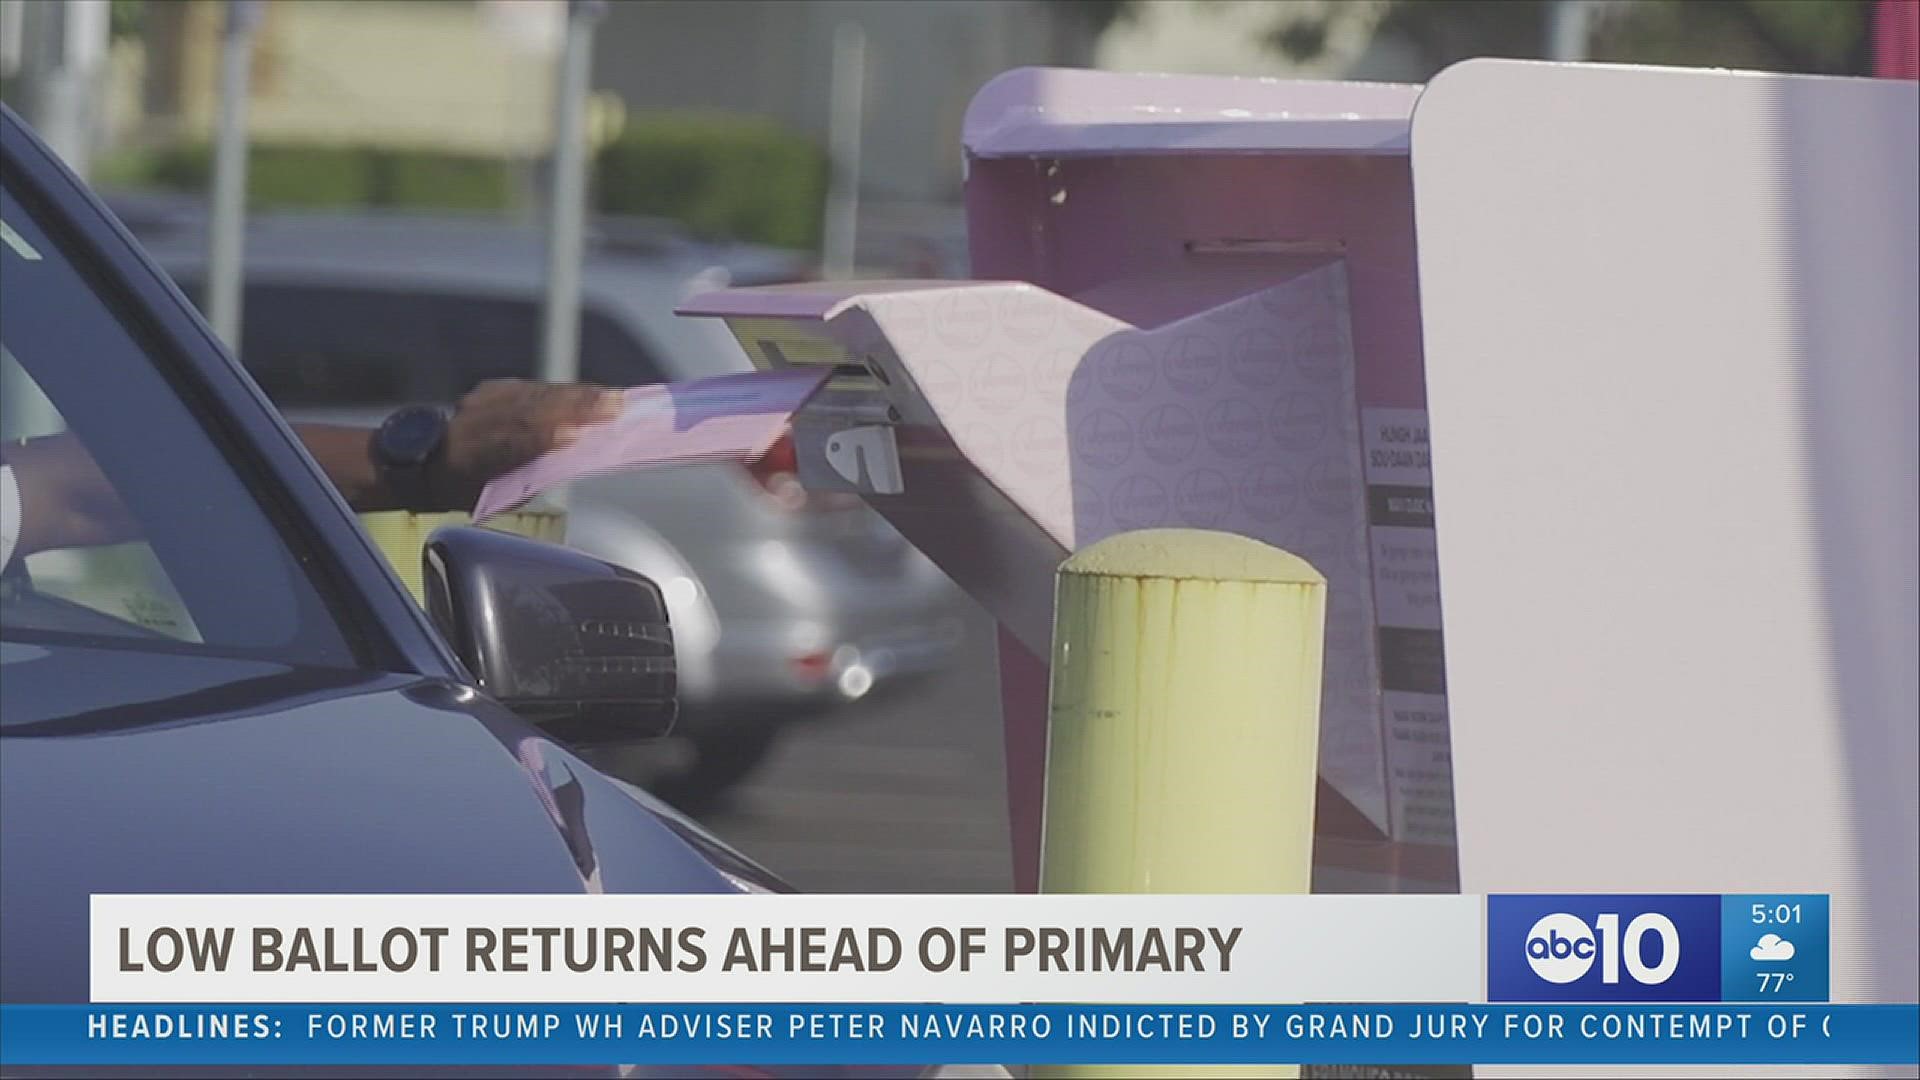 More than 21,000,000 ballots were mailed to registered California voters last month — but as of Saturday, only 13% of those ballots have been returned so far.